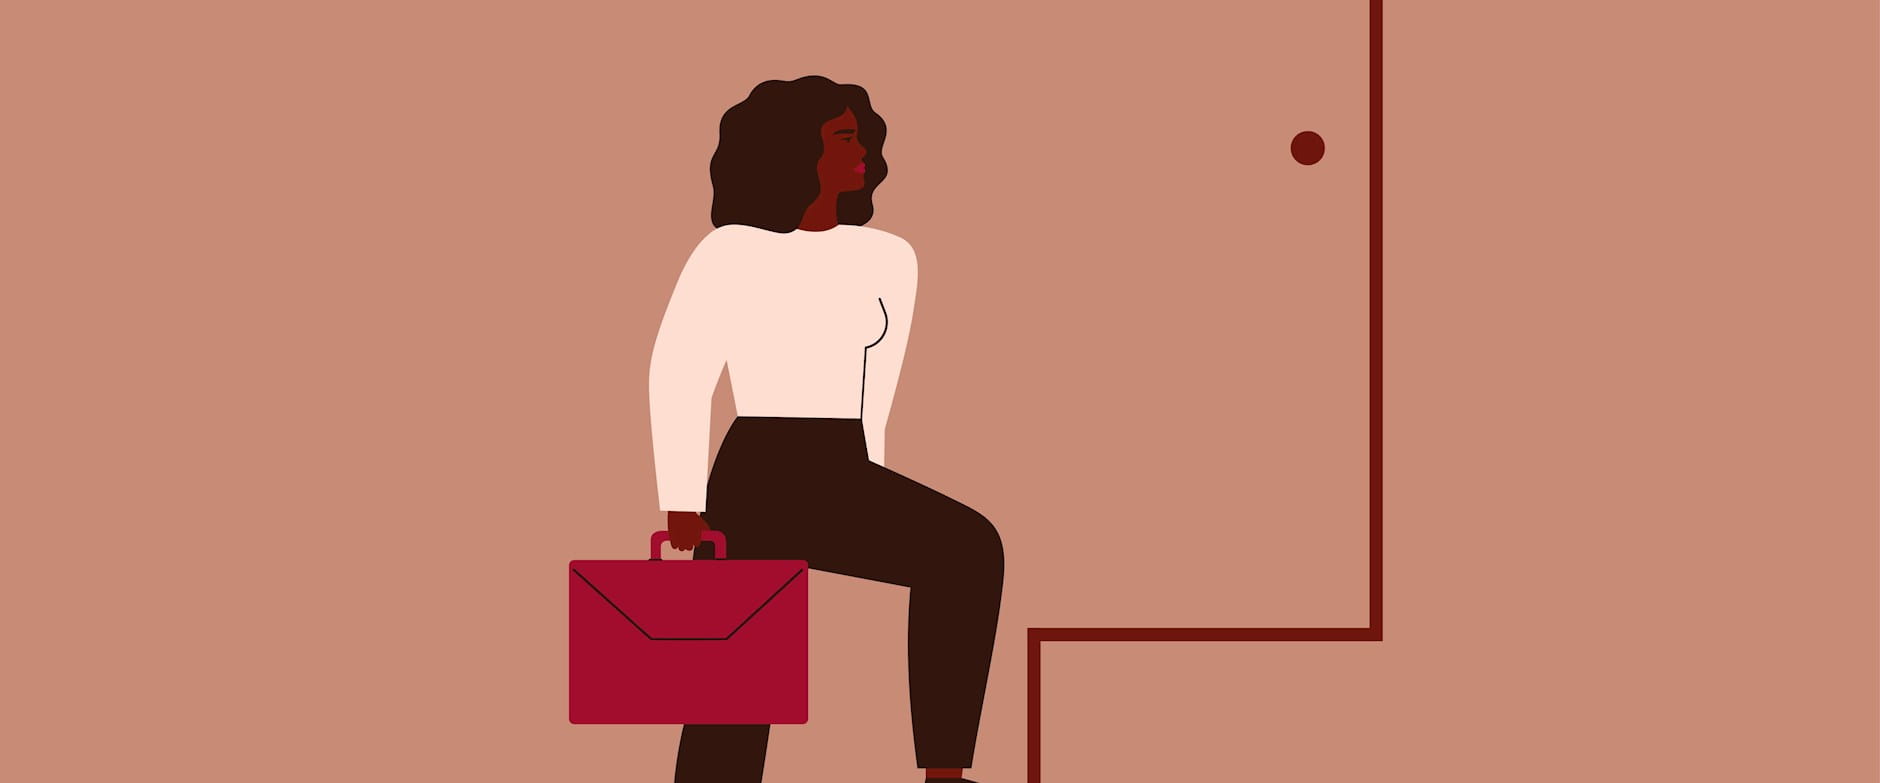 Illustration of Black woman with briefcase walking up stairs